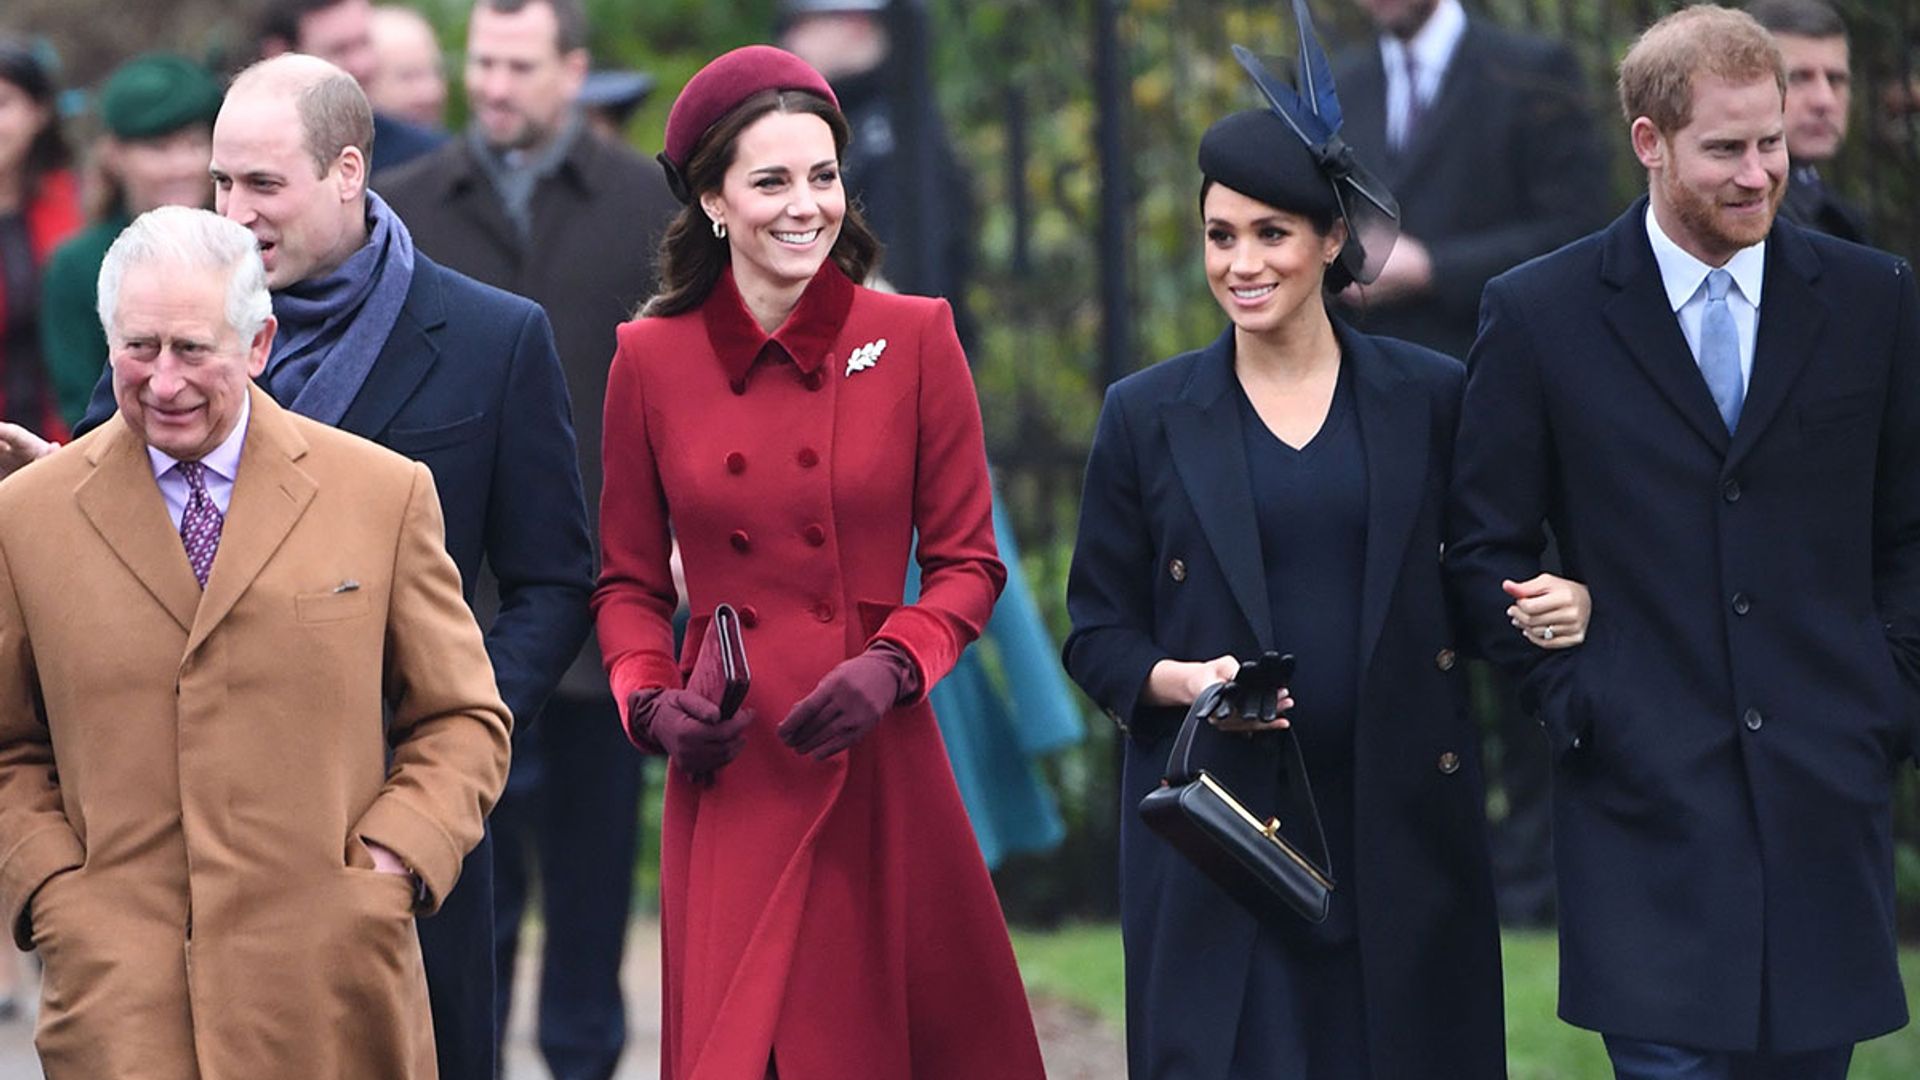 8 unusual Christmas gifts the royals have given each other